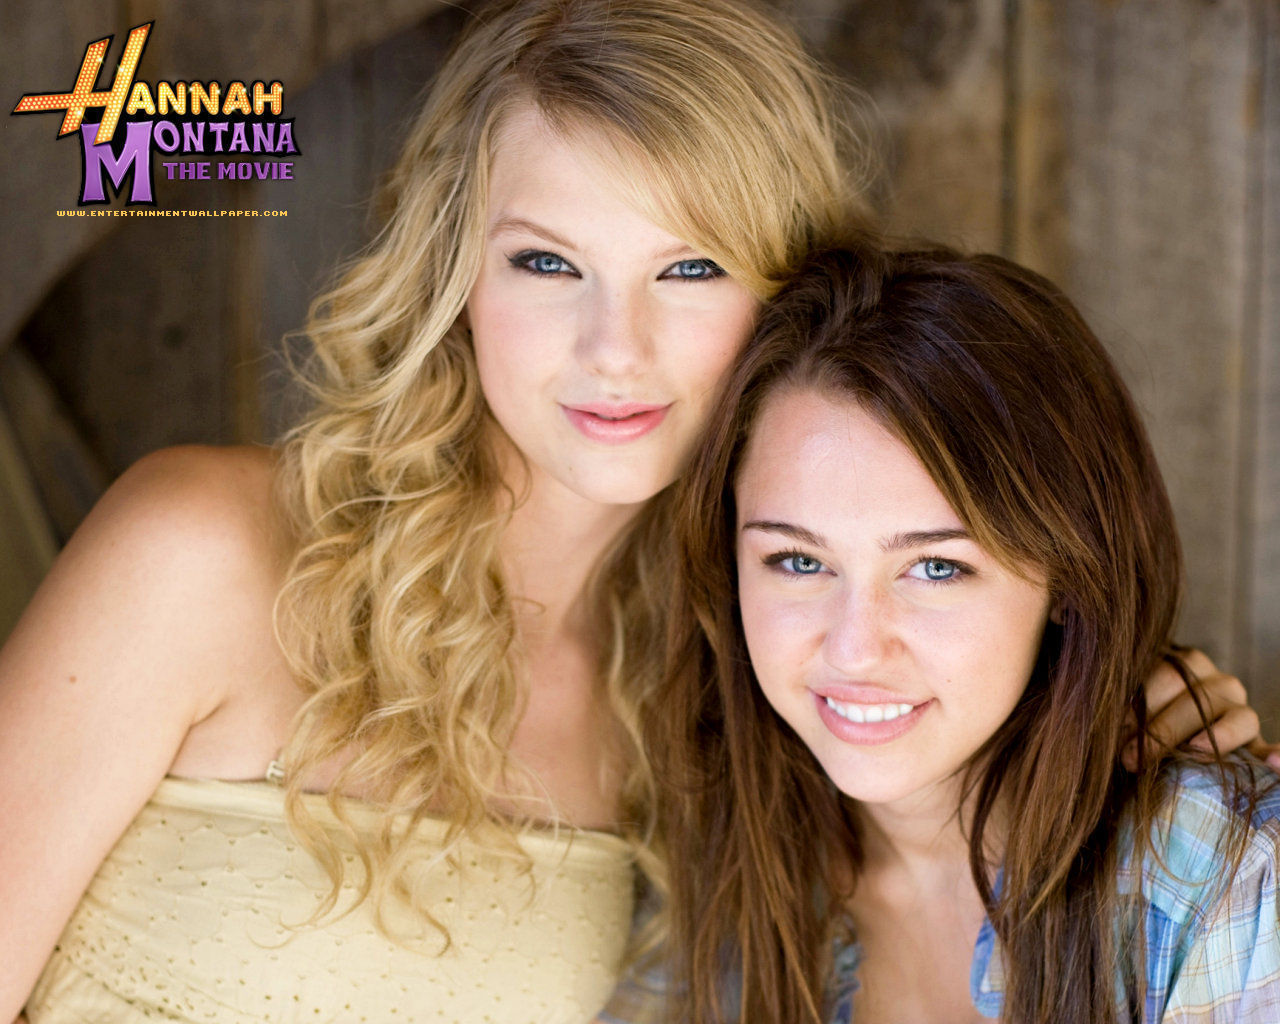 http://images2.fanpop.com/images/photos/7600000/Miley-Cyrus-and-Taylor-Swift-demi-lovato-and-miley-cyrus-7634487-1280-1024.jpg